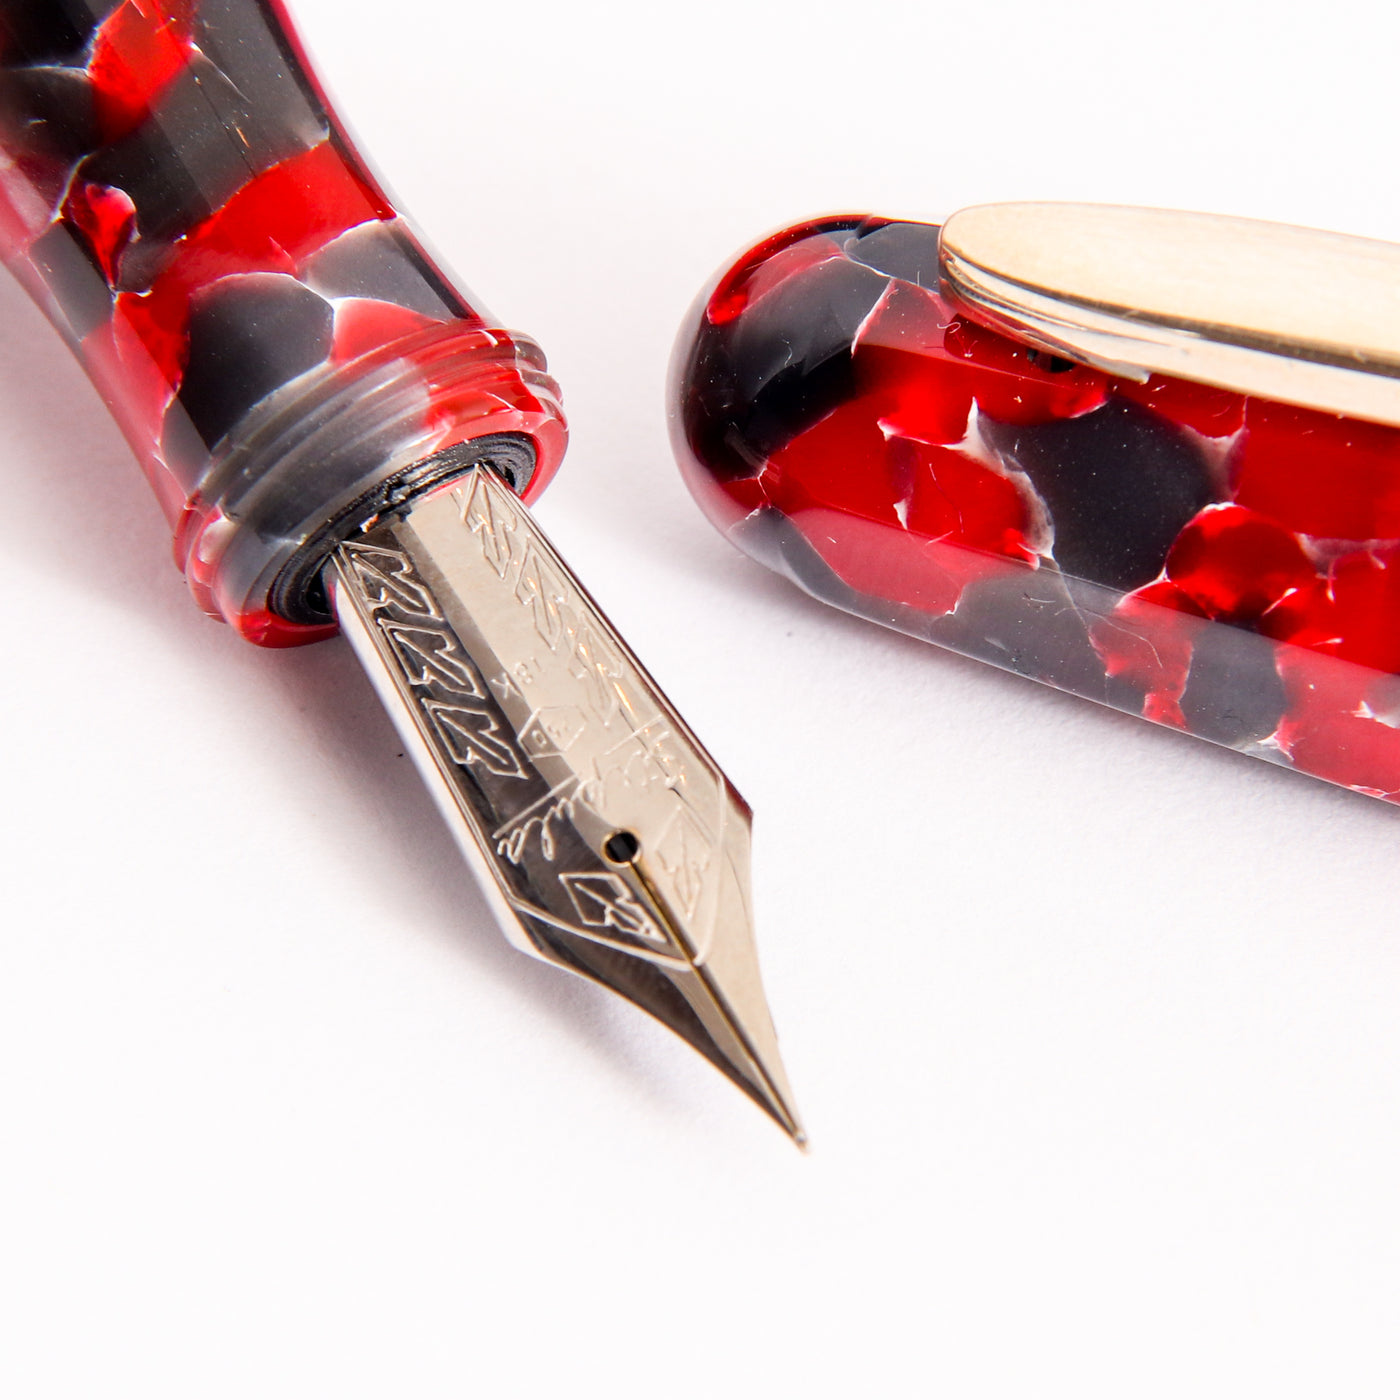 Stipula Etruria Faceted Red Currant Fountain Pen 18K Gold Nib Details